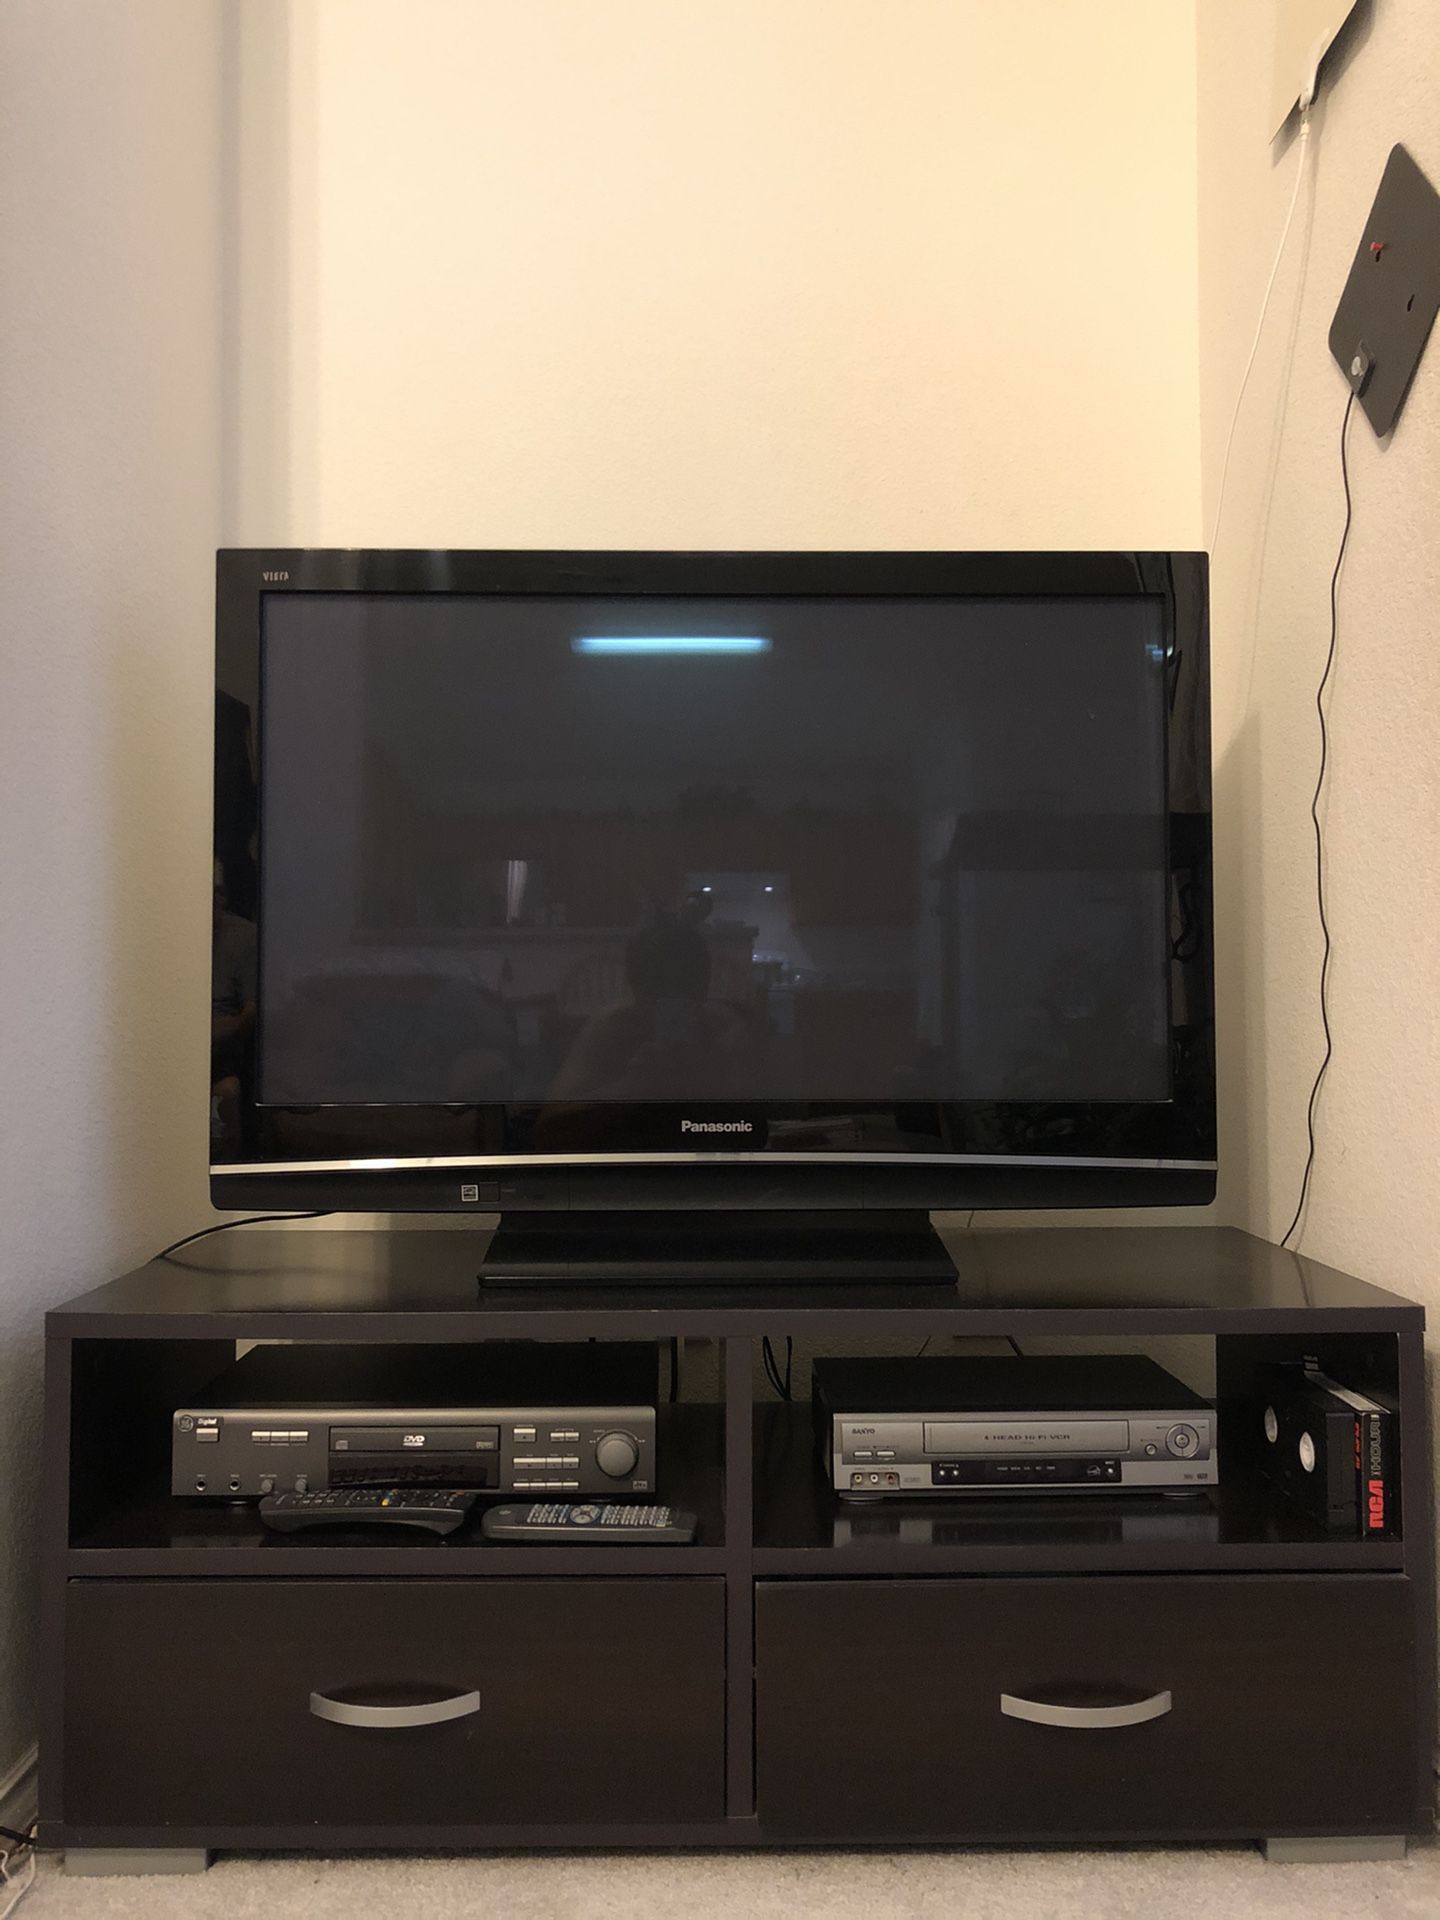 47” Panasonic HD Television and TV stand